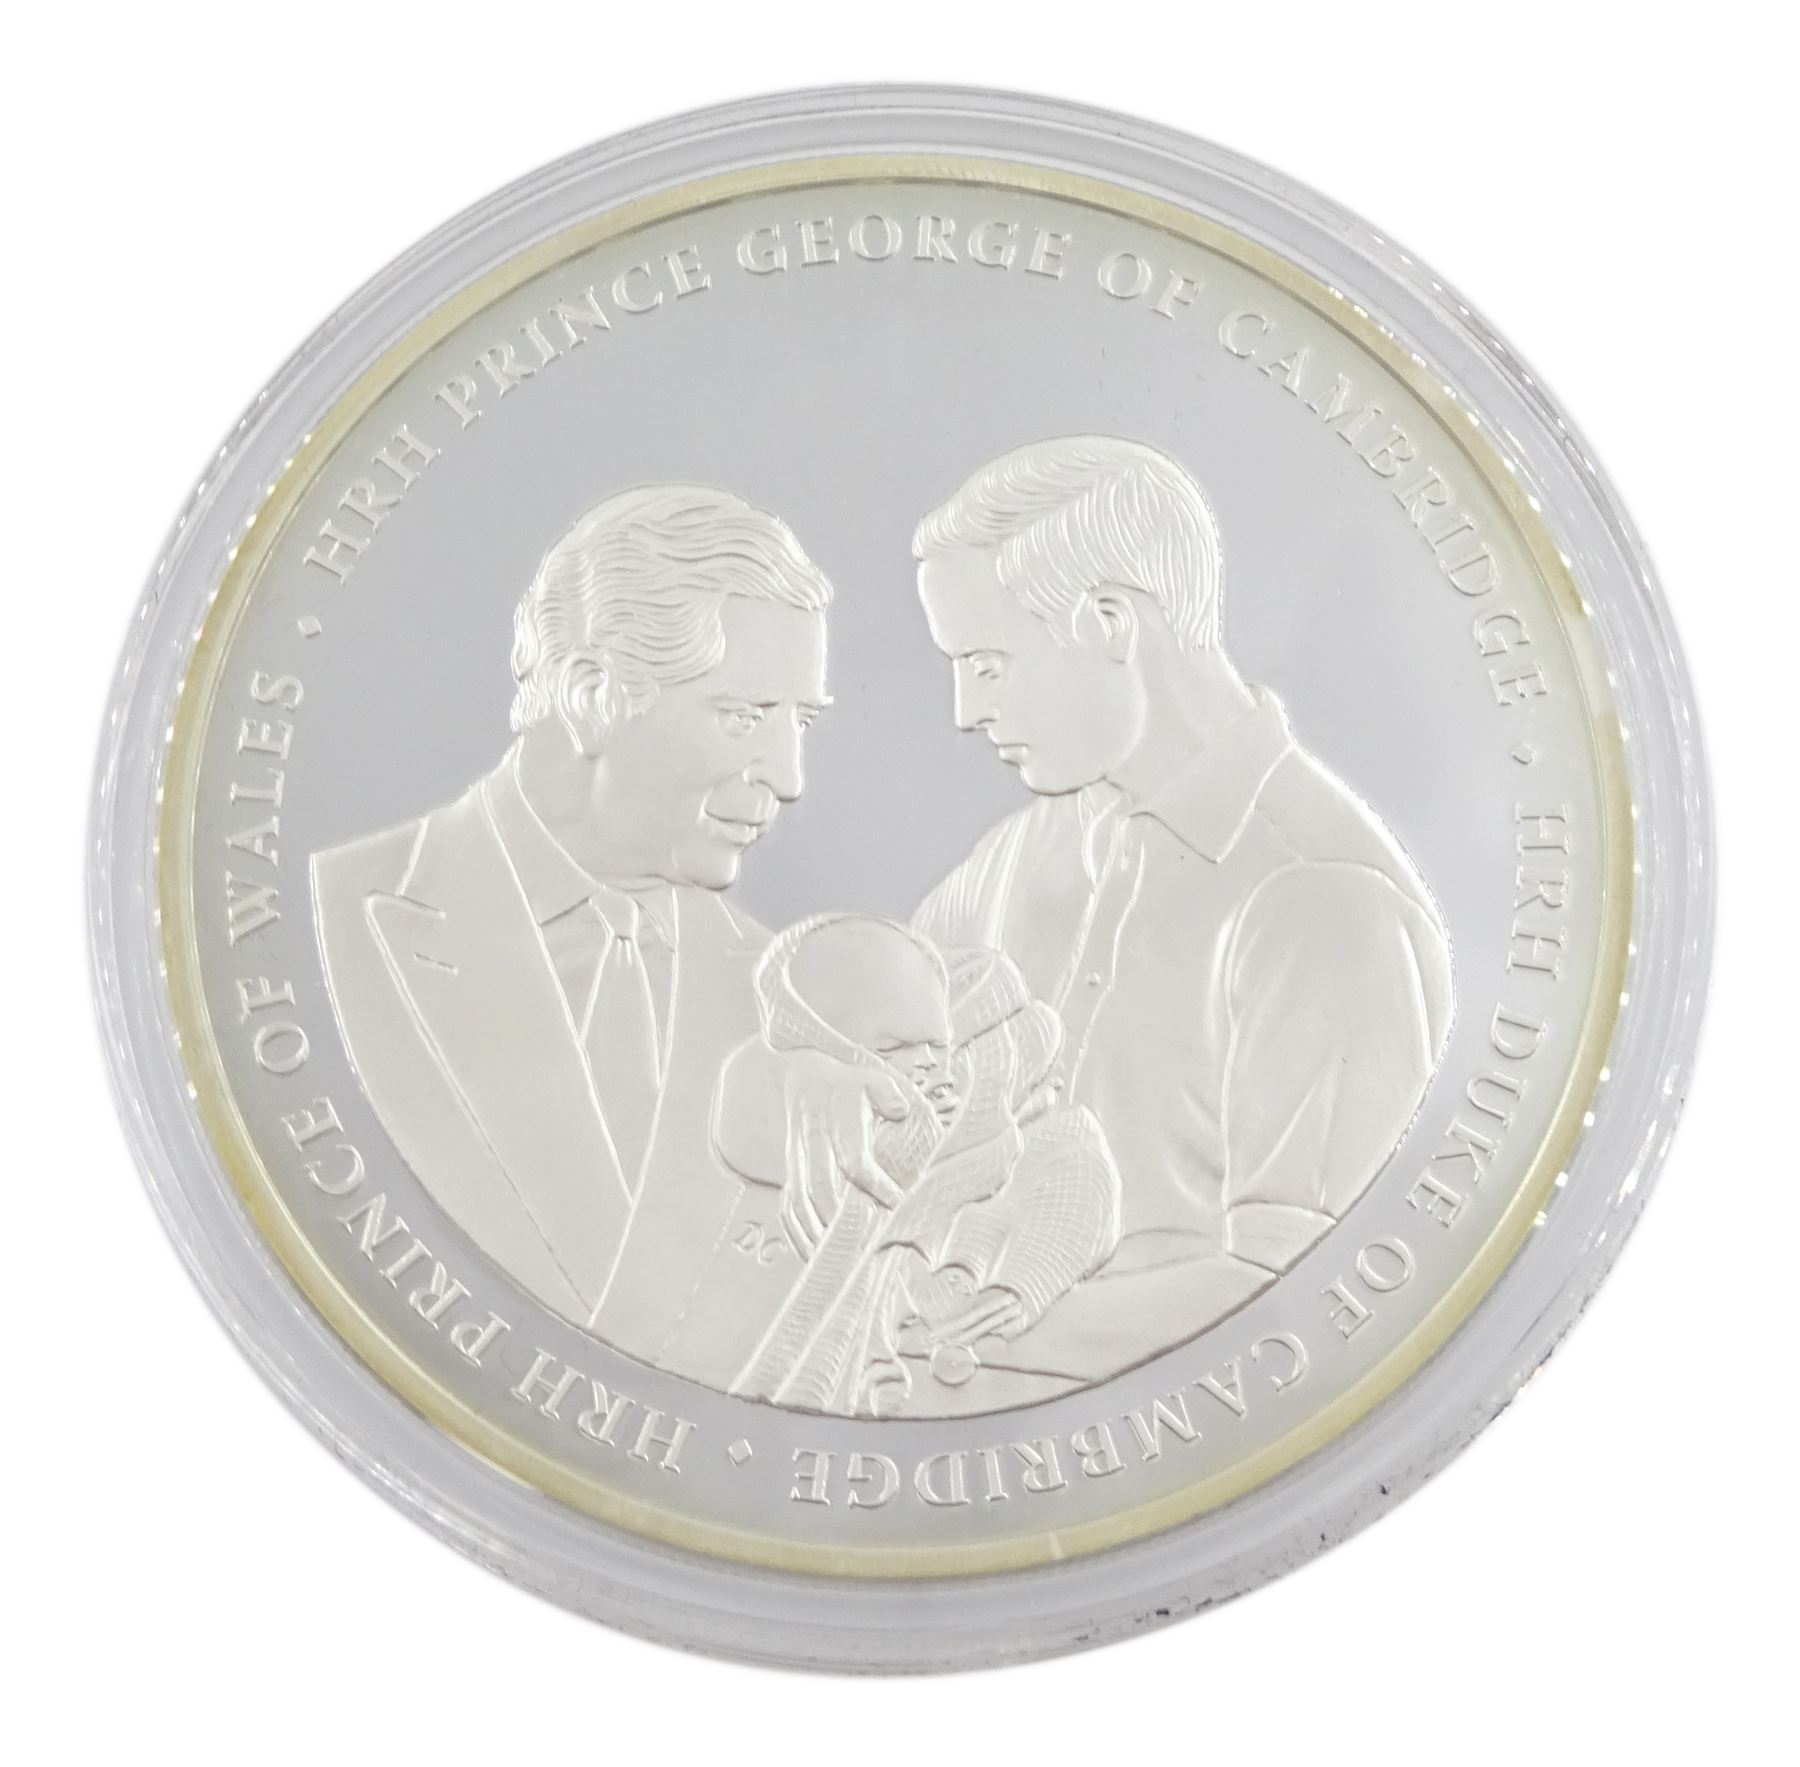 Queen Elizabeth II Cook Islands 2013 'The Royal Line of Succession' silver twenty-five dollars coin - Image 2 of 5